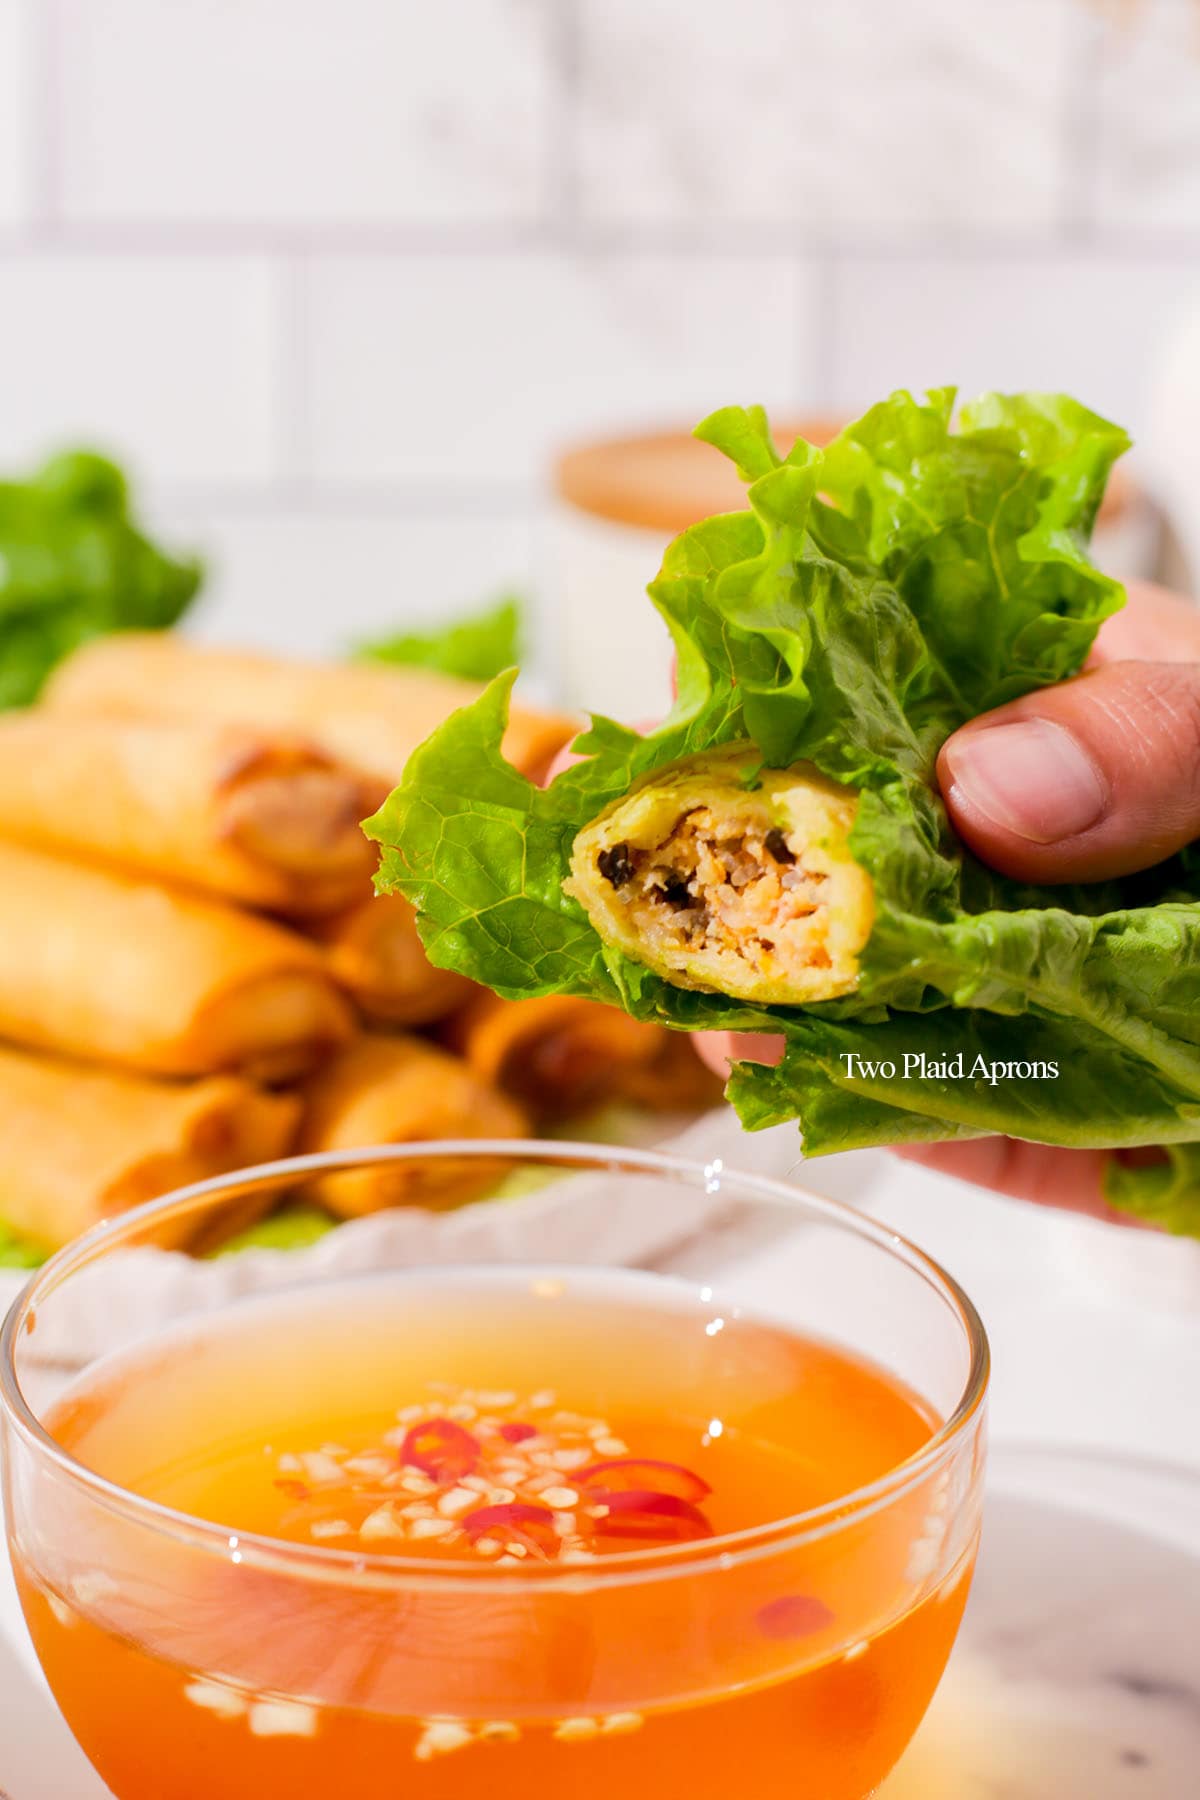 Showing the inside of the Vietnamese egg rolls.